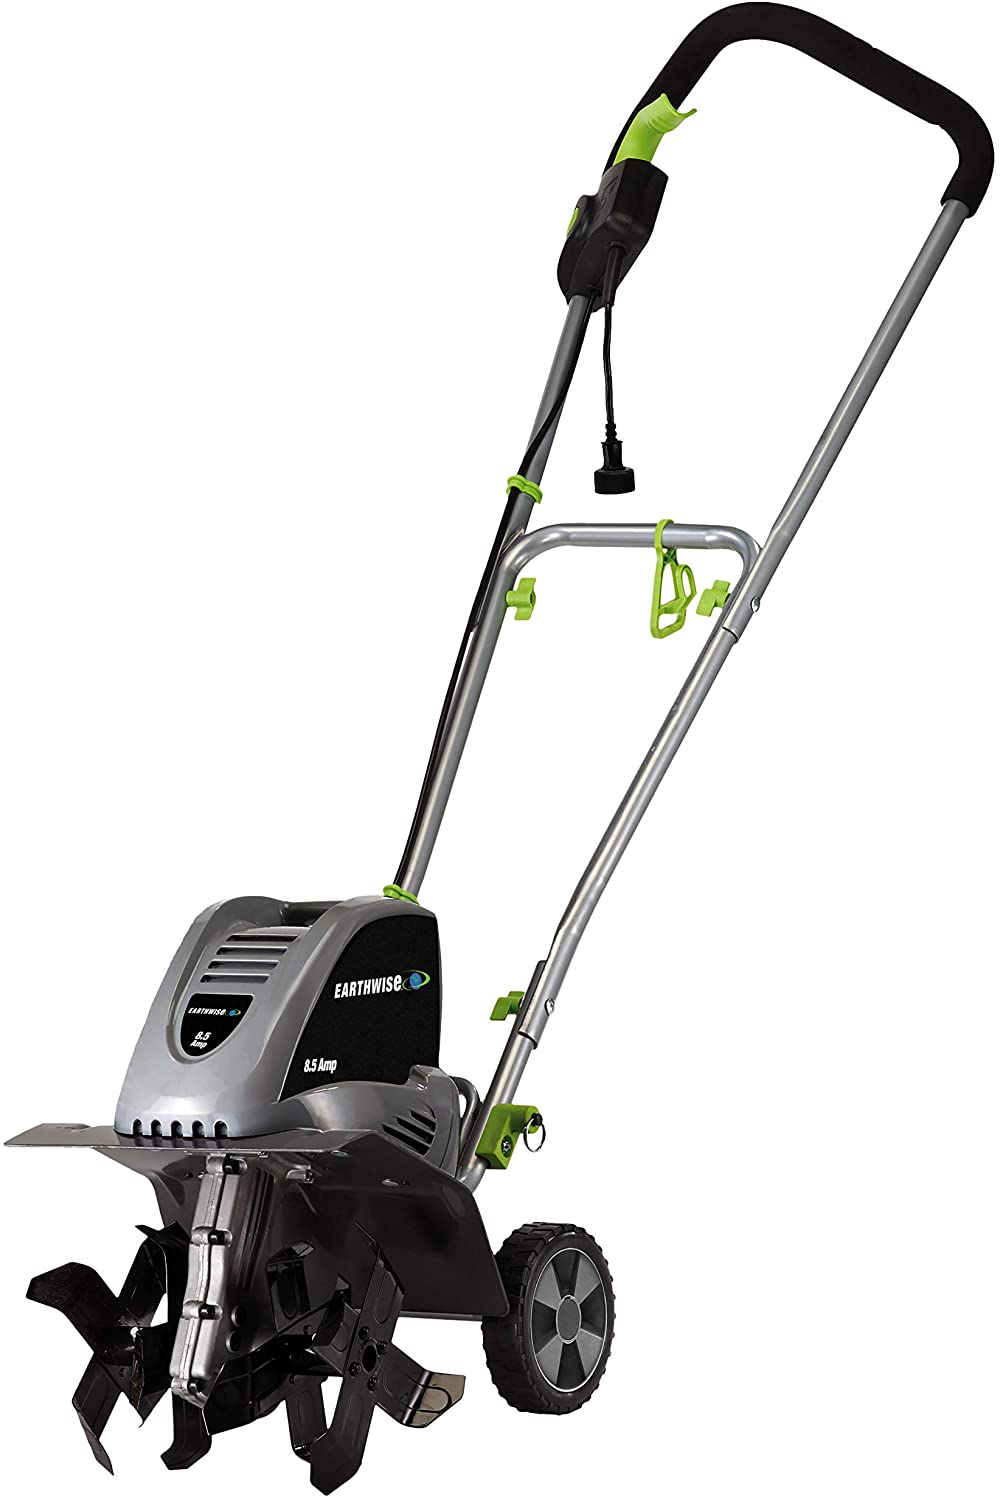 Earthwise TC70001 Corded Electric Tiller/Cultivator